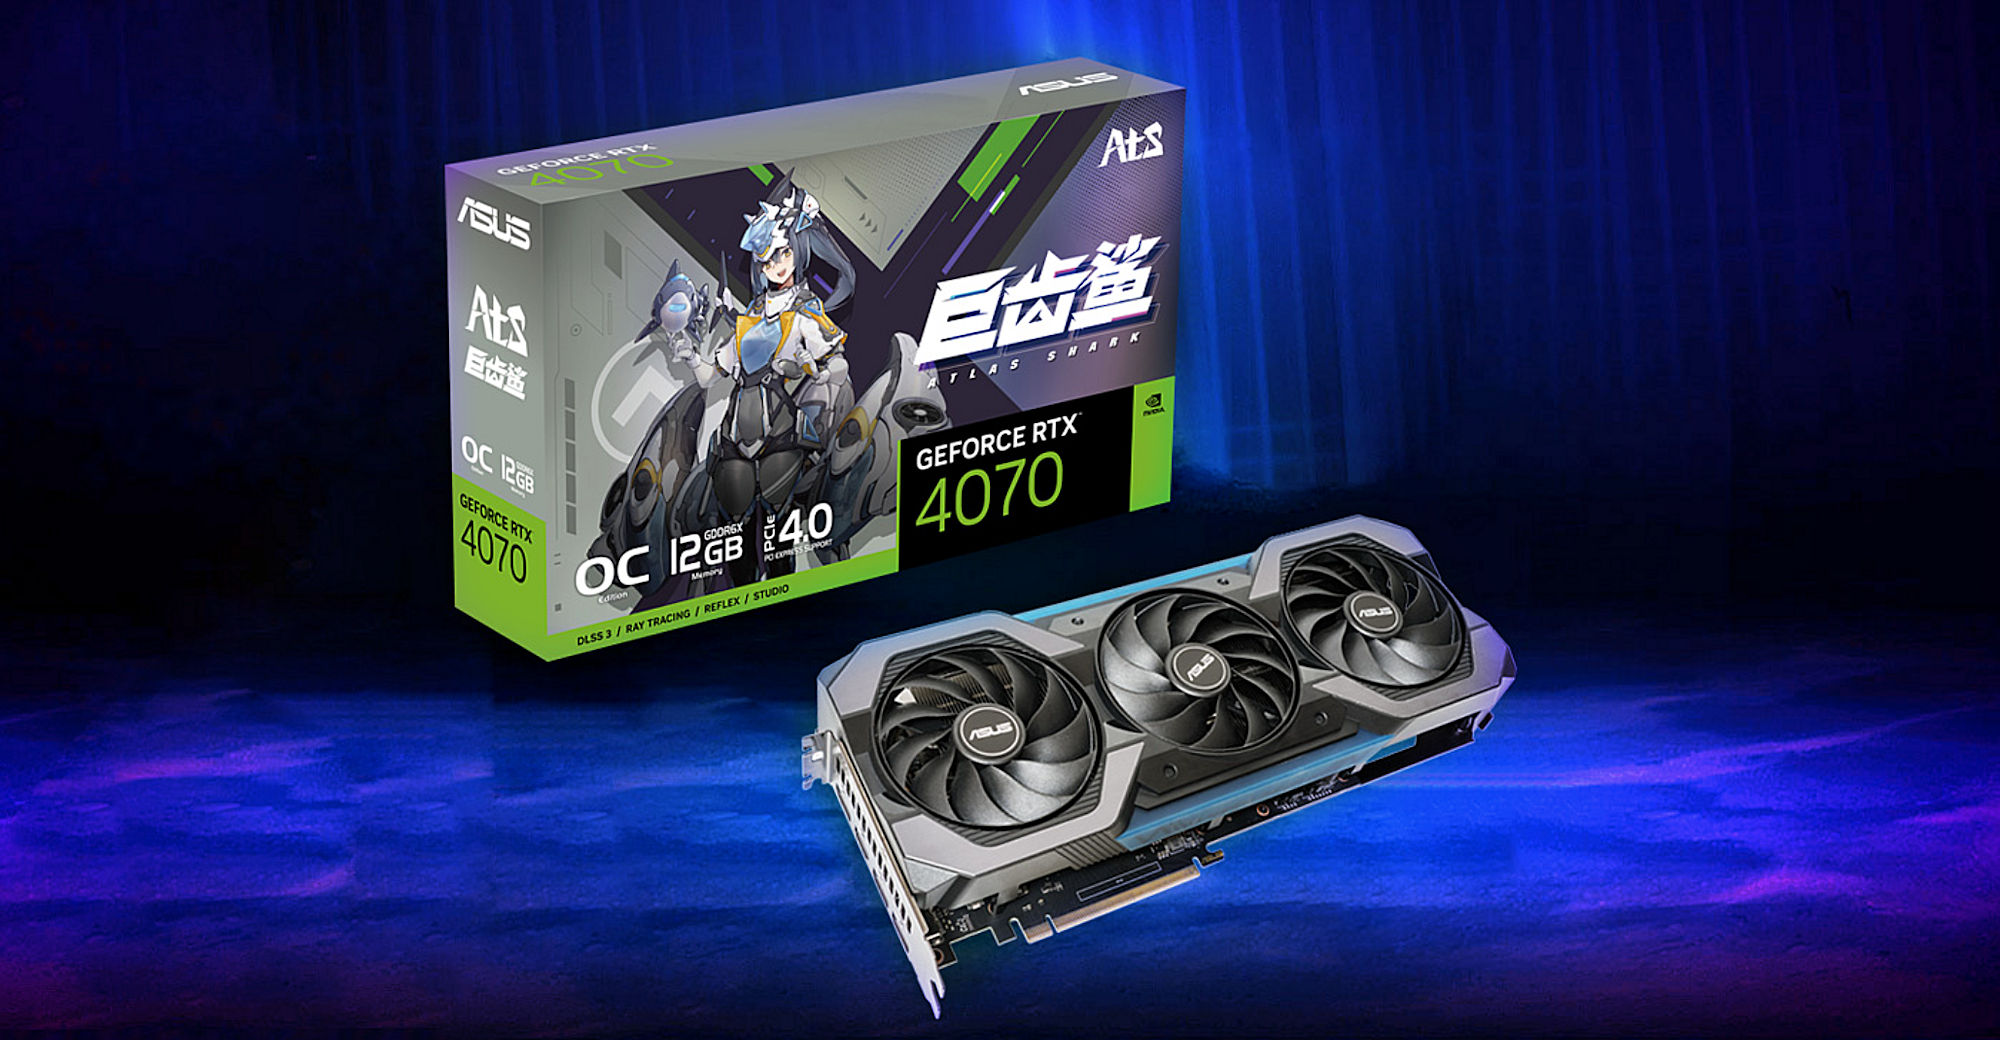 ASUS introduces GeForce RTX 4070 Atlas Shark graphics card for